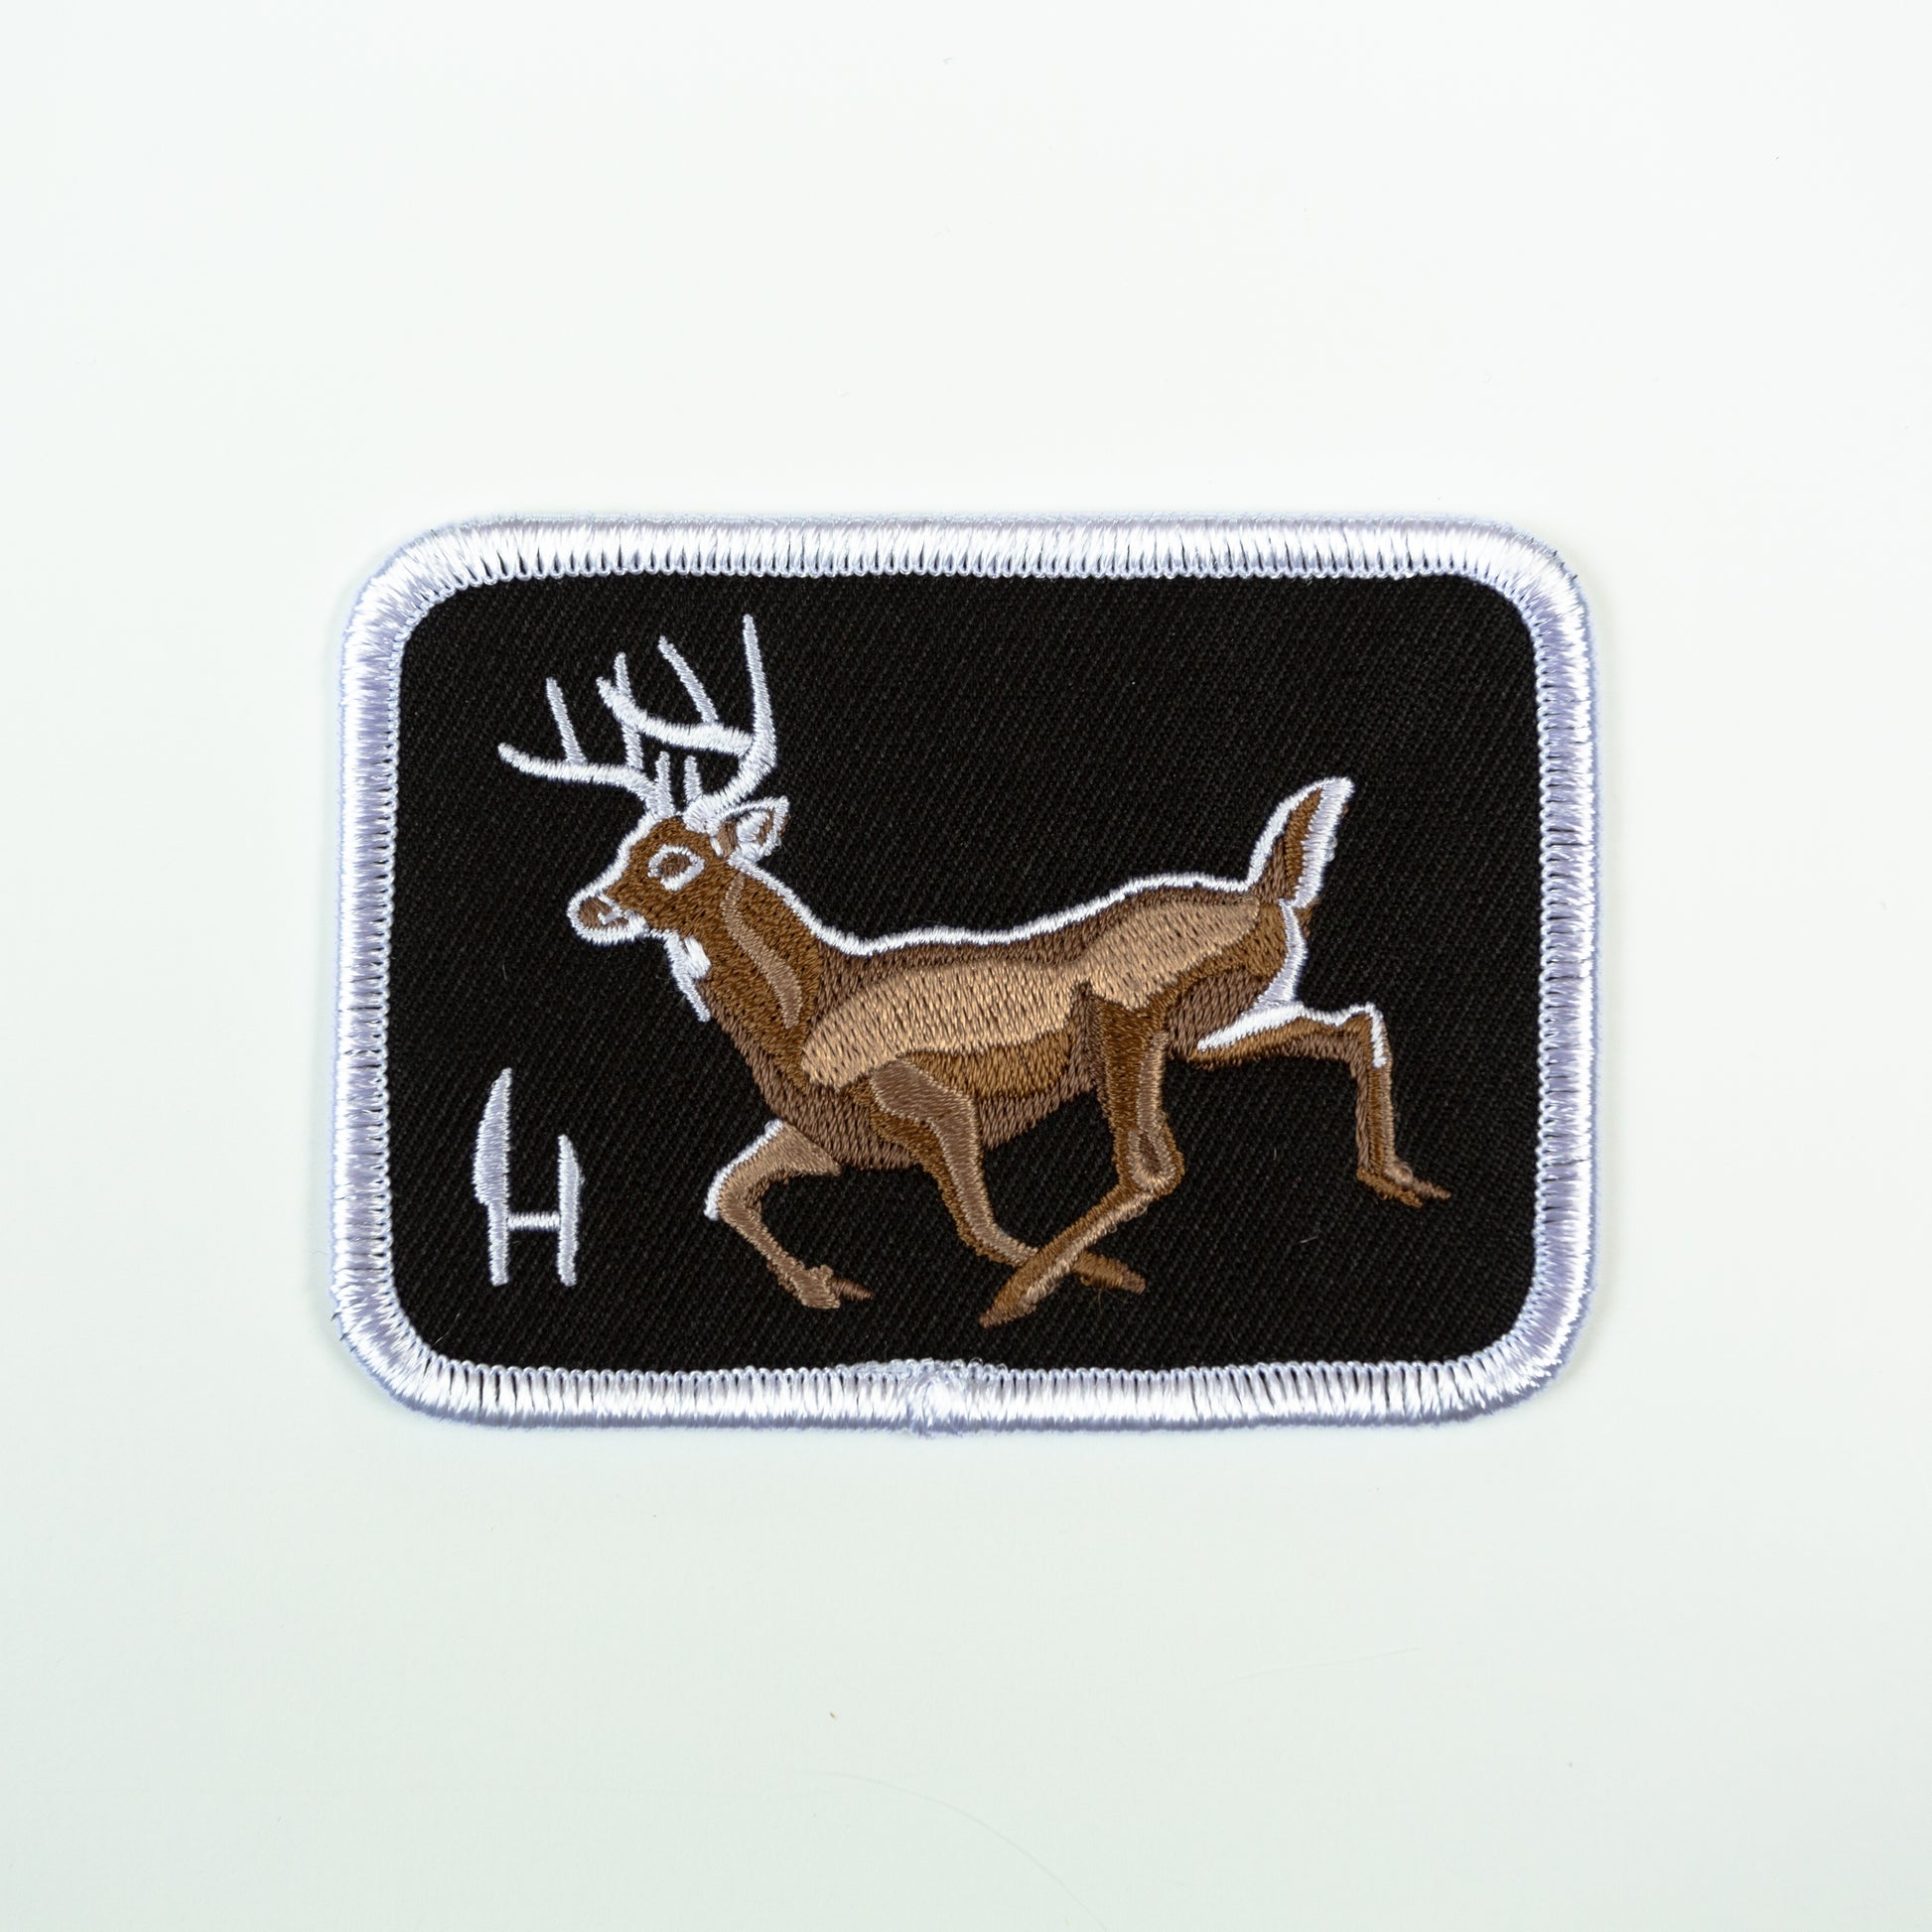  An embroidered patch of a whitetail deer buck.  A black twill fabrick background with a whitetail Buck embroidered in shades of warm brown with white highlights.  surrounded by a white merrowed edge and emblazened with the Hunt to eat H/knives logo